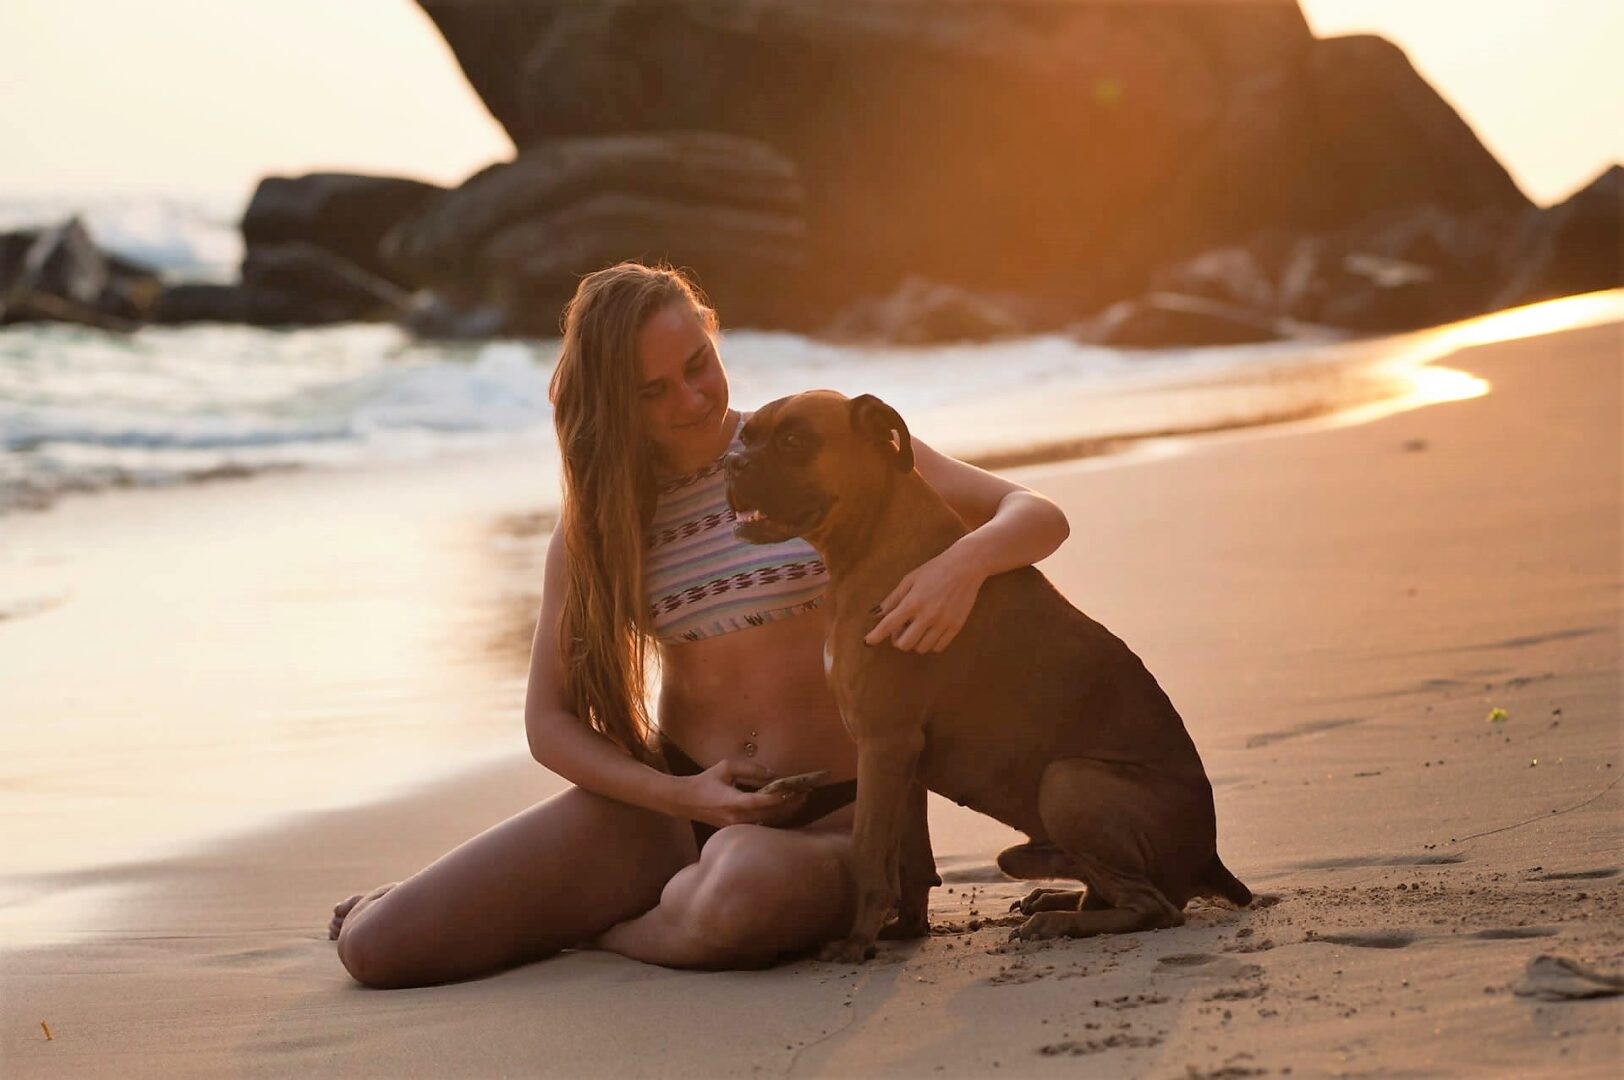 A woman sitting on the beach with a dog.